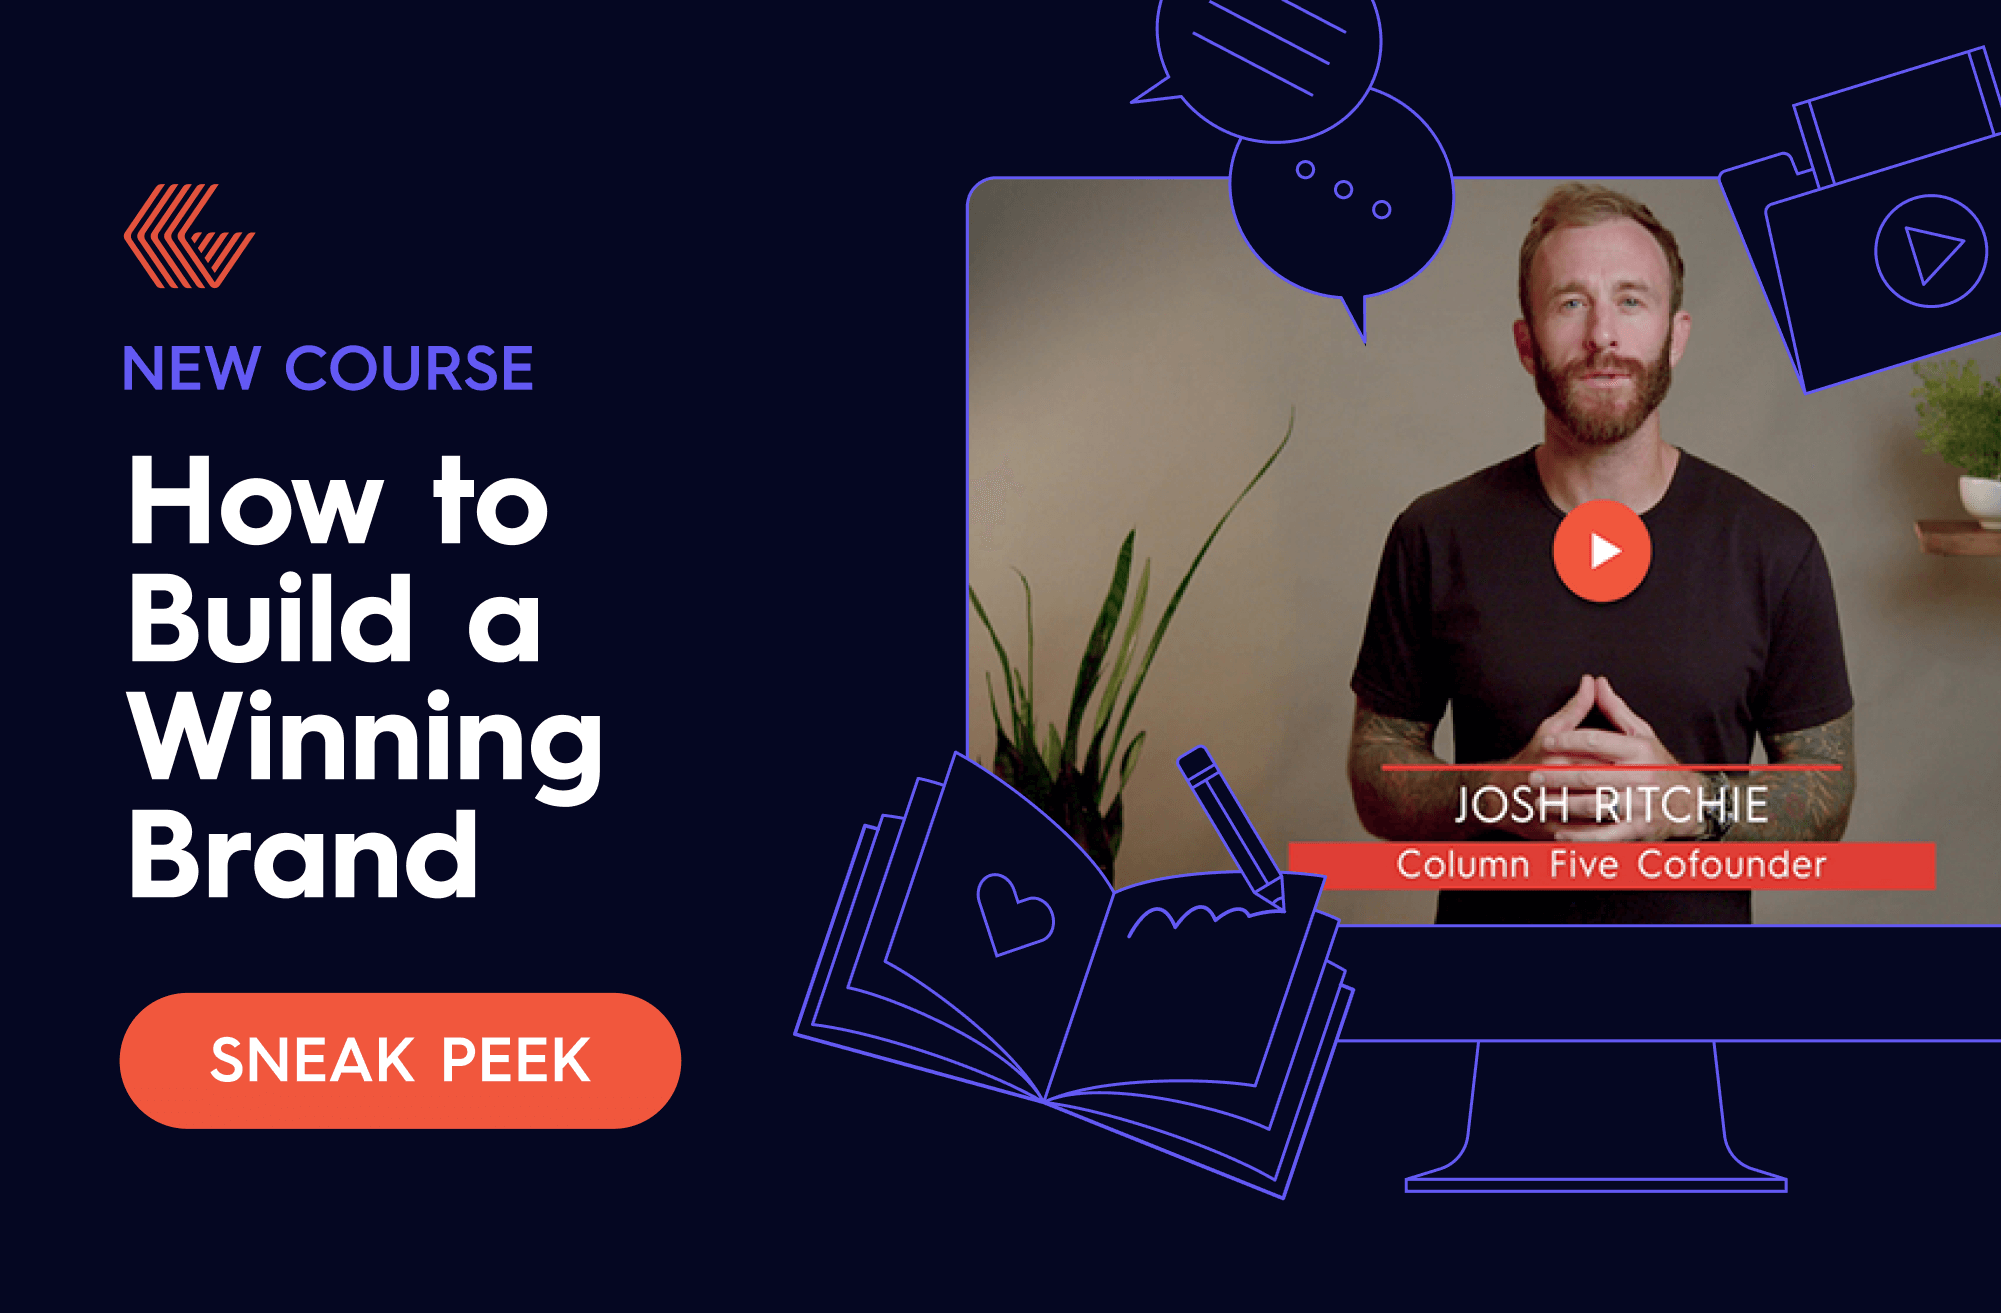 How to build a winning brand course